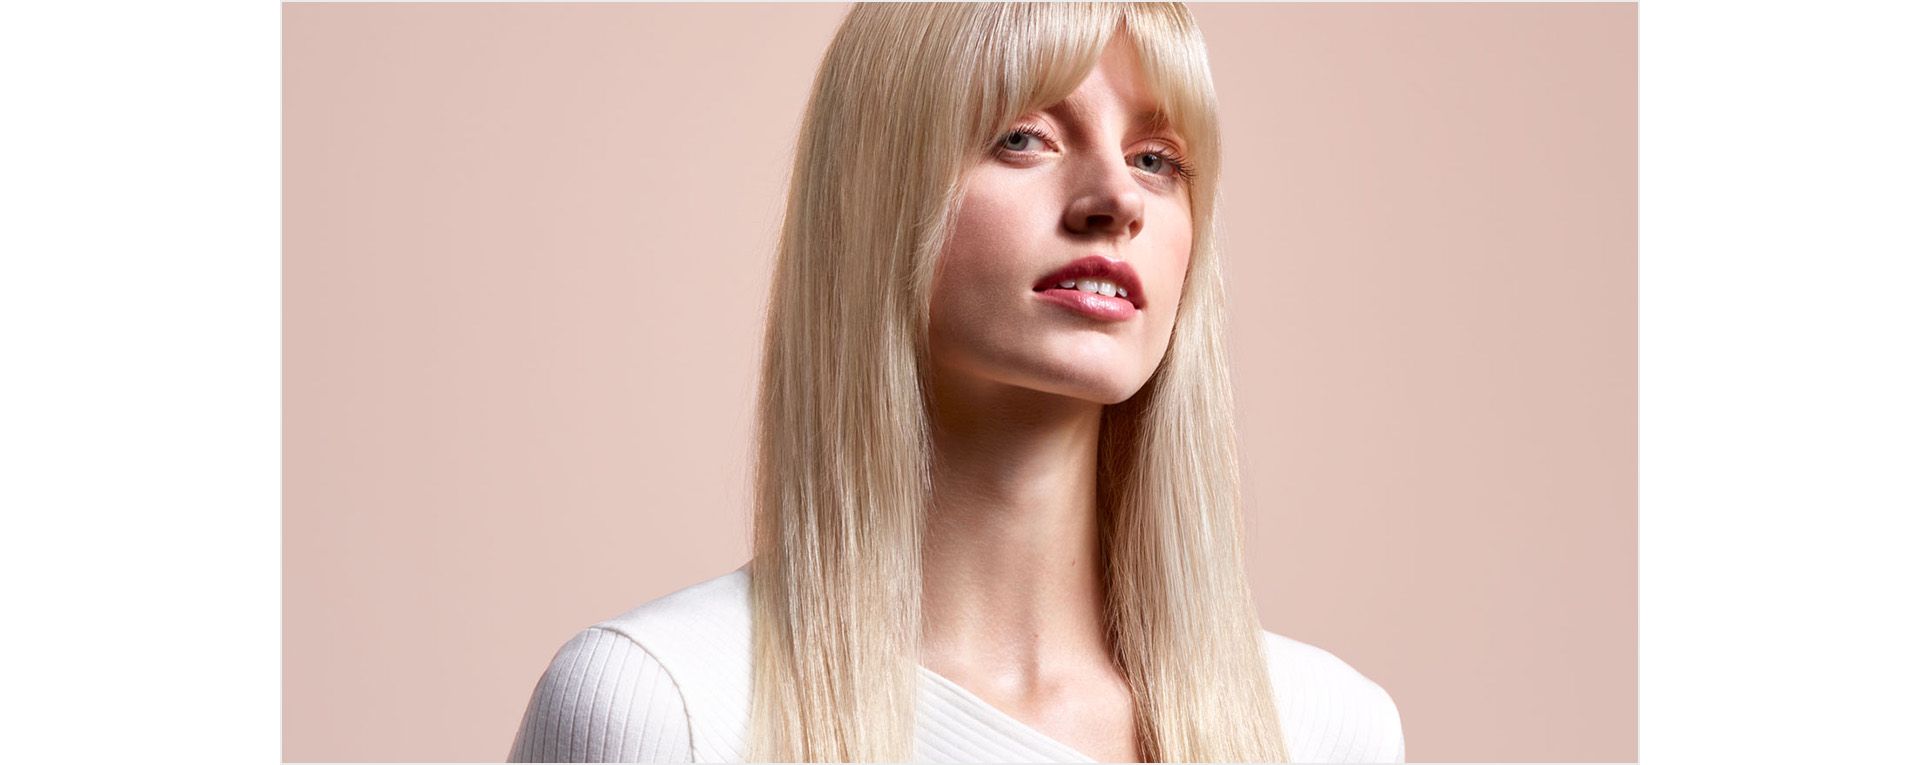 Model with long, blonde, dry hair.